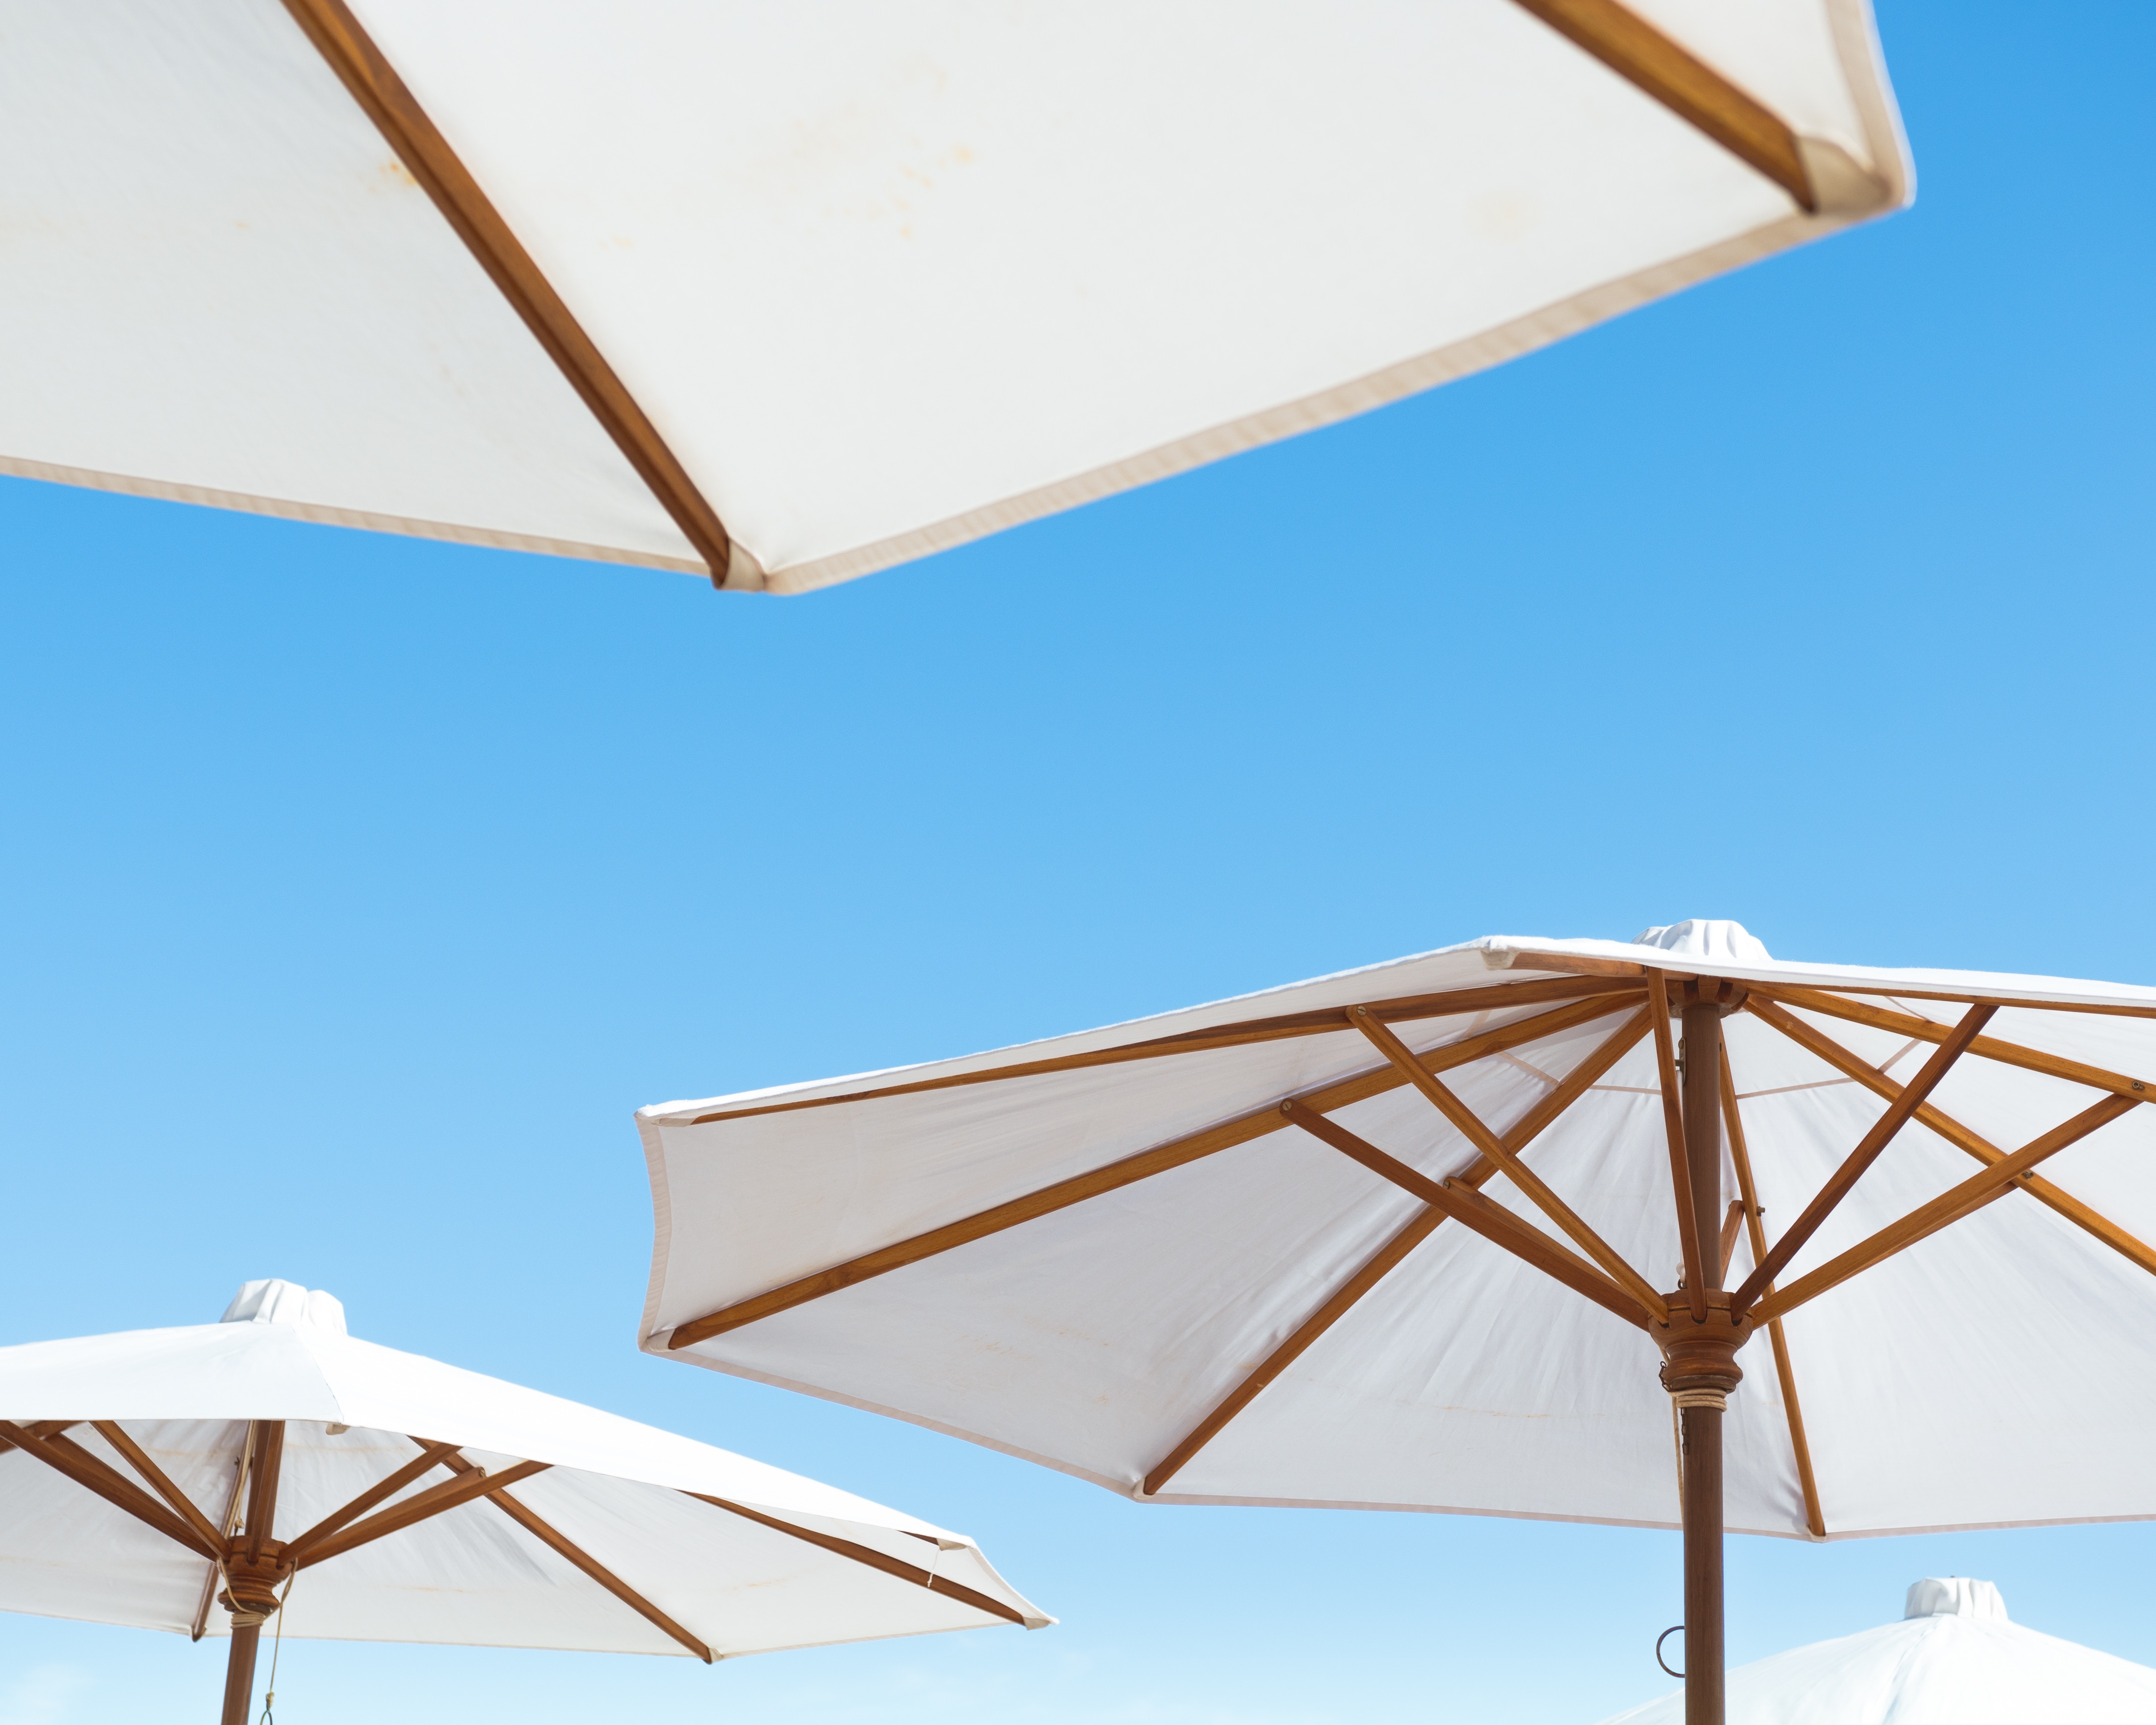 Outdoor Patio Umbrella Ing Guide, What Size Umbrella Do I Need For A 48 Inch Table